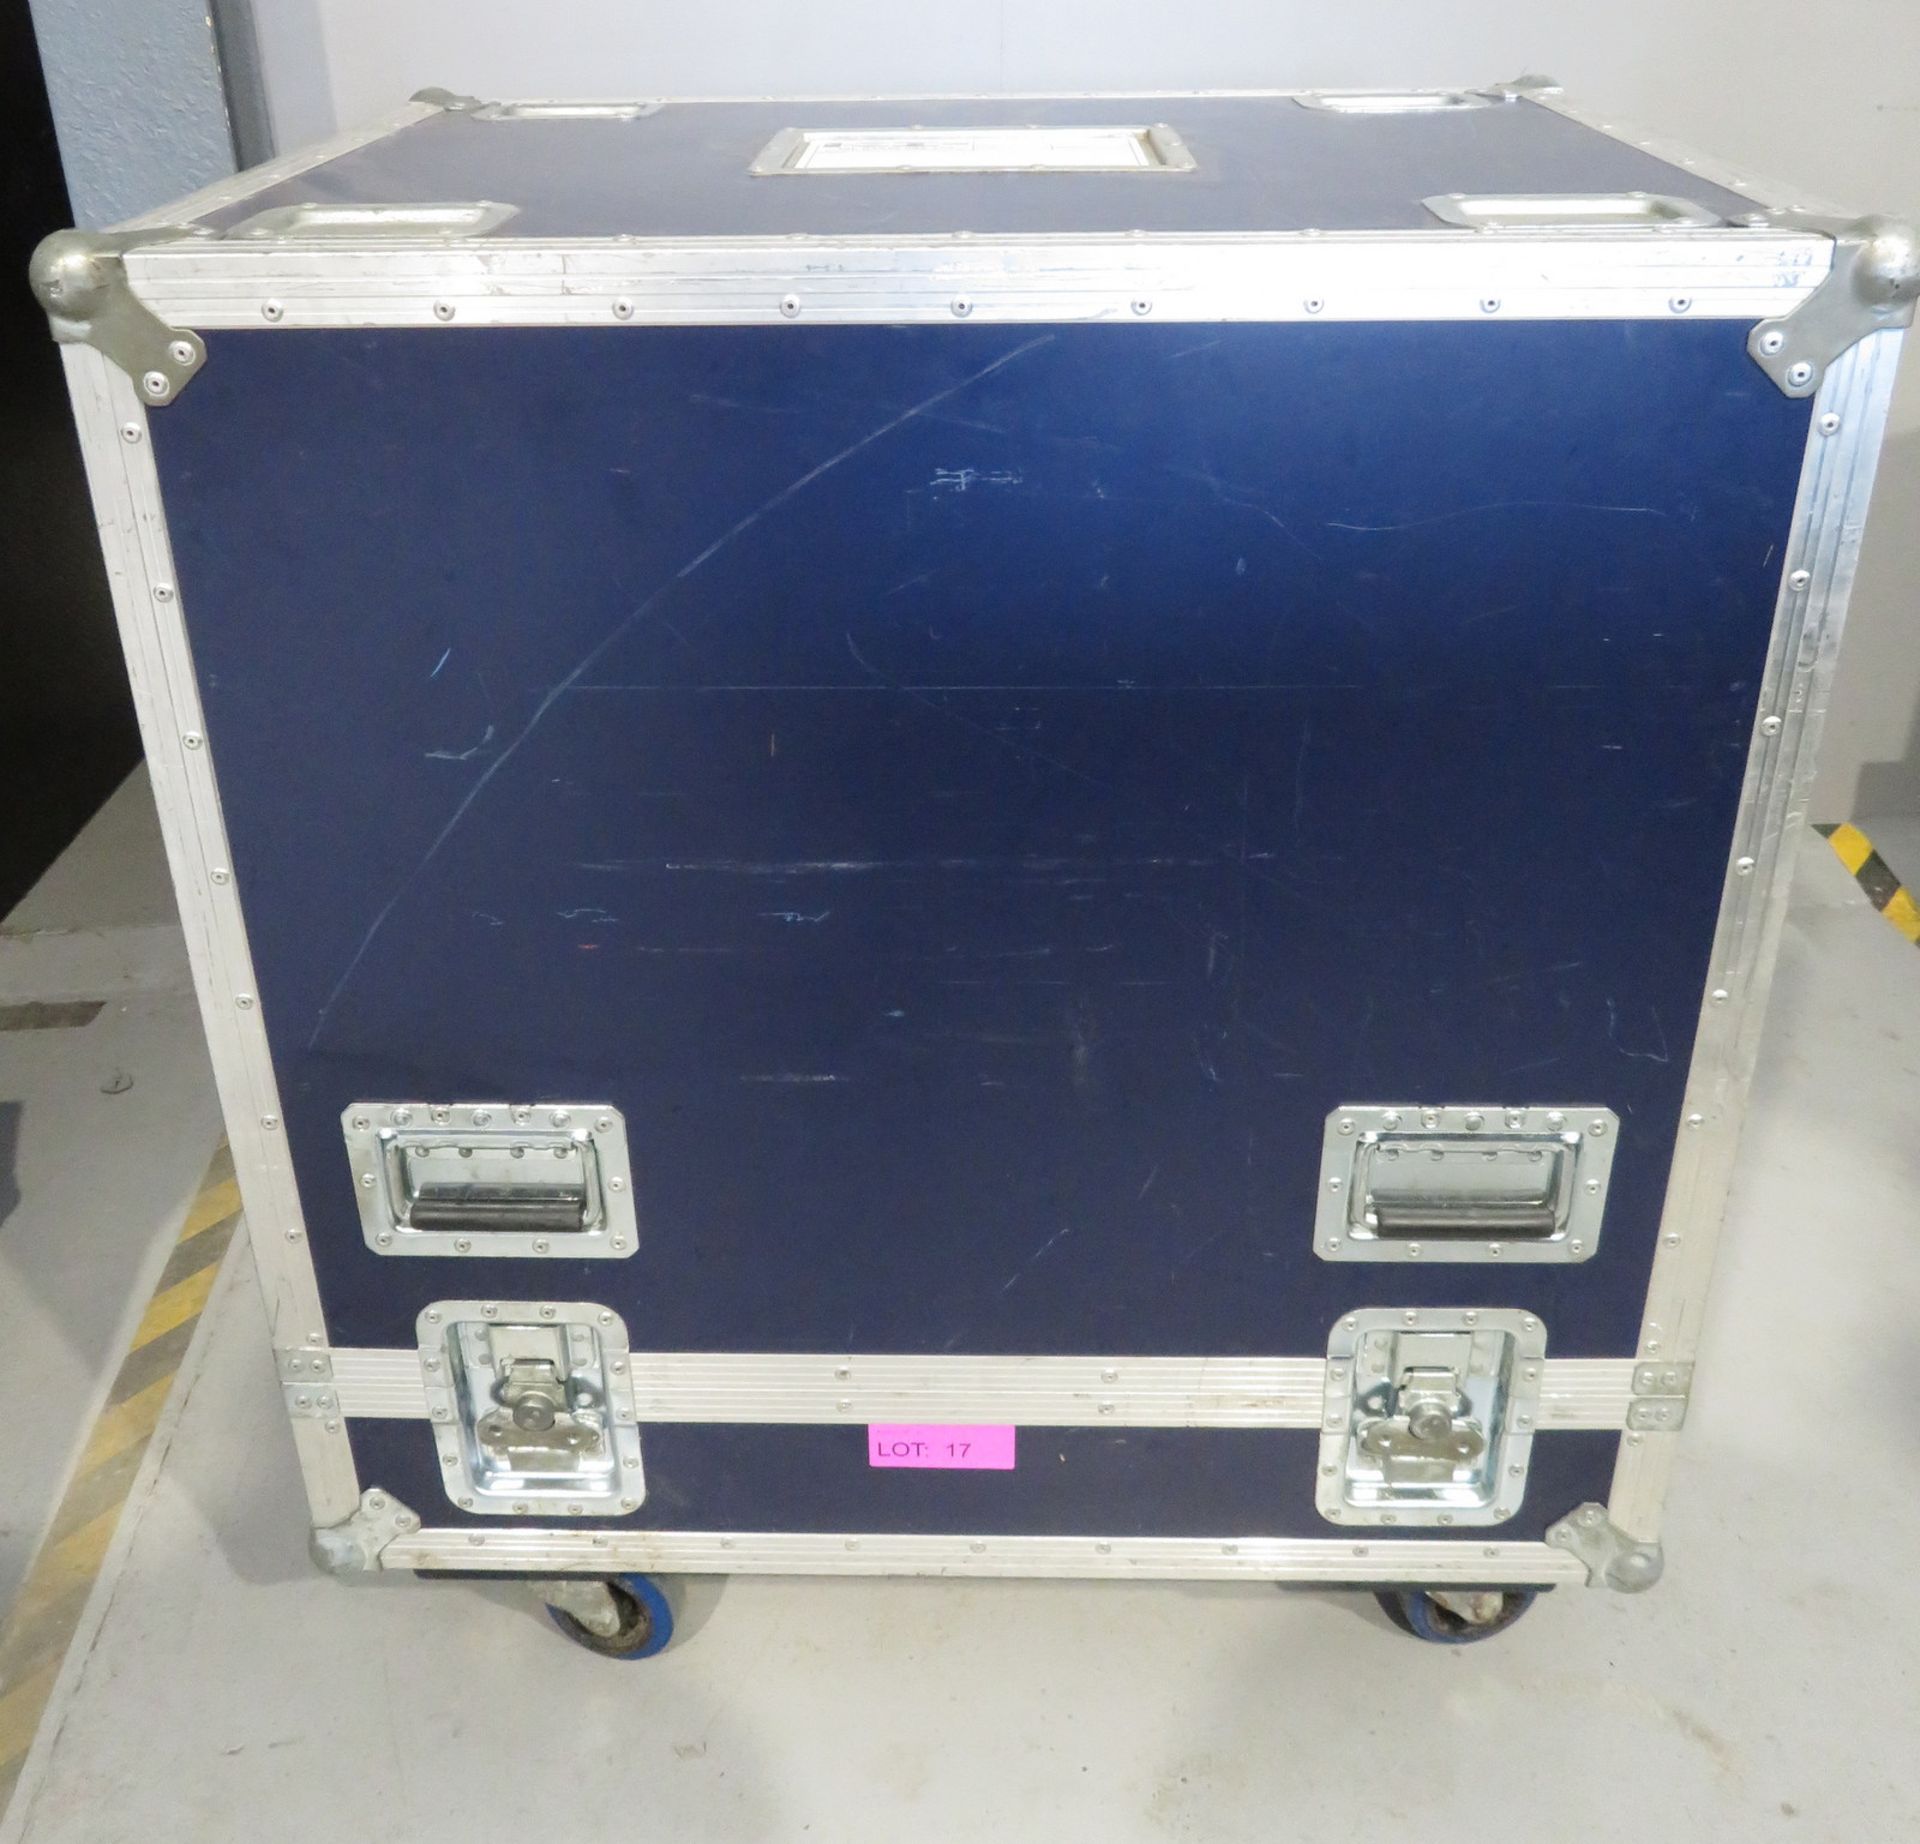 Studio Due City Colour 2500 Wash in flightcase. Working condition. Hours: 1349. - Image 9 of 9